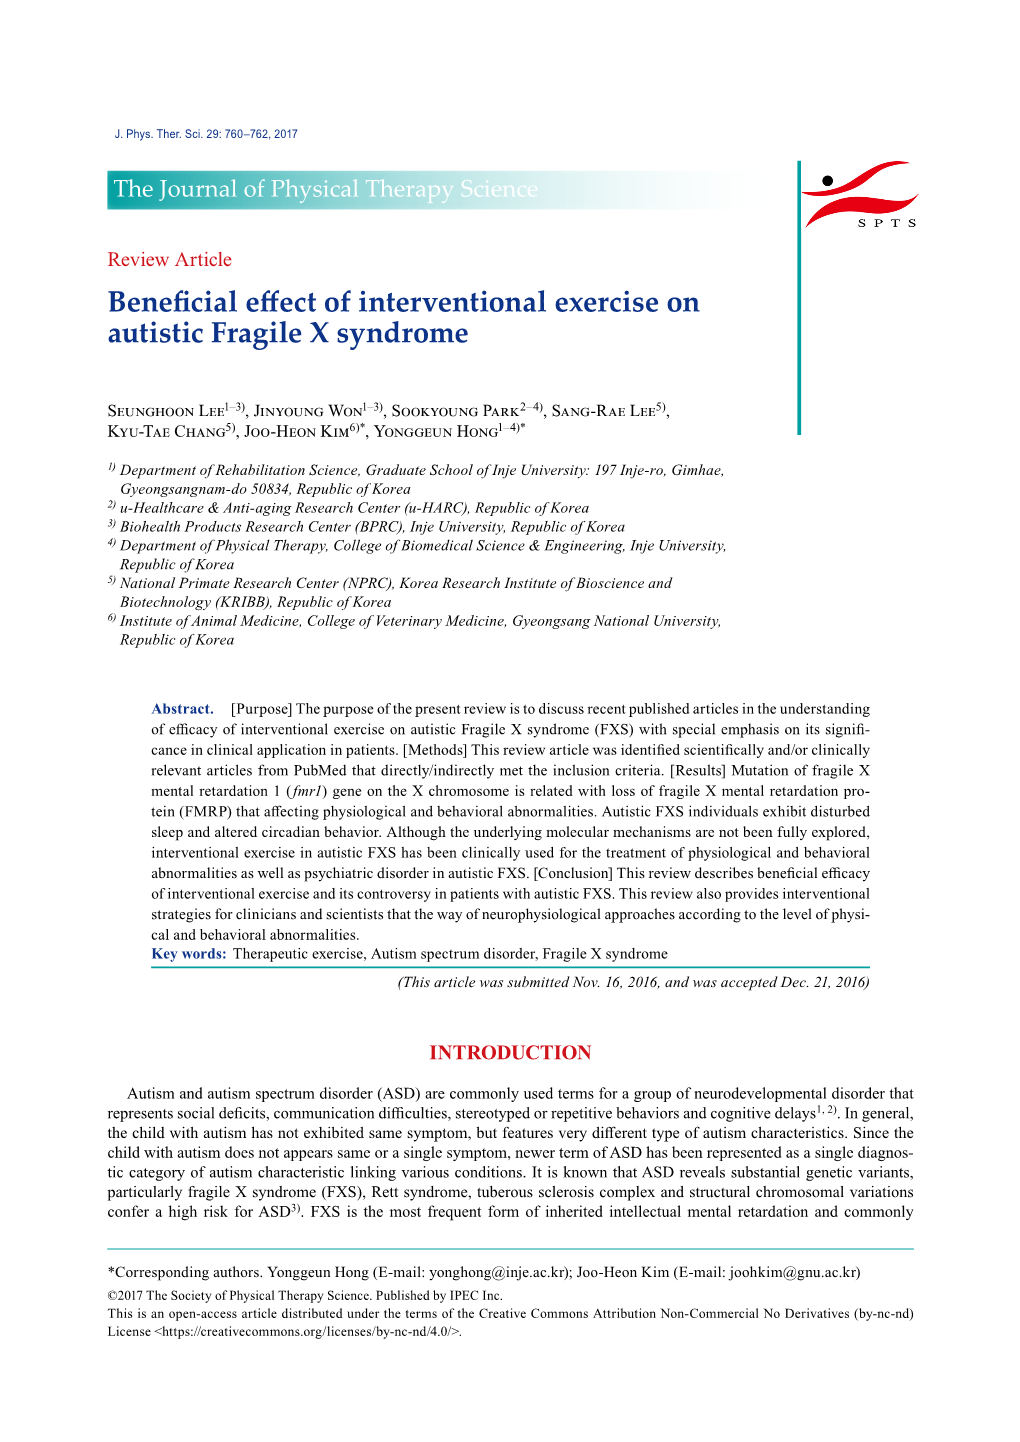 Beneficial Effect of Interventional Exercise on Autistic Fragile X Syndrome